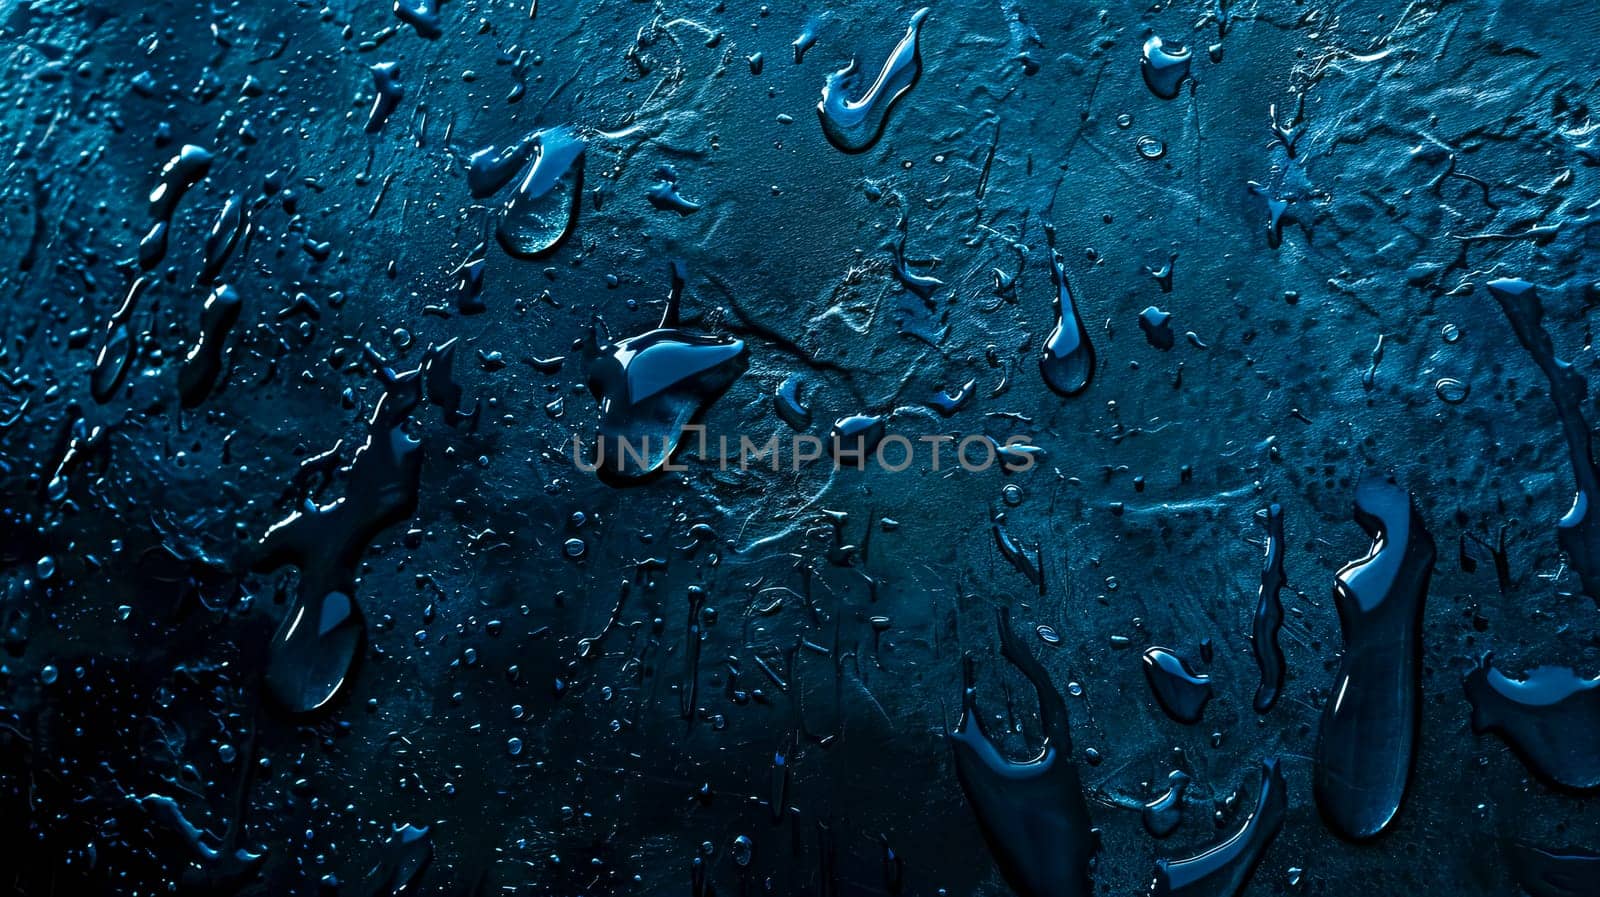 Abstract blue water droplets on textured surface by Edophoto